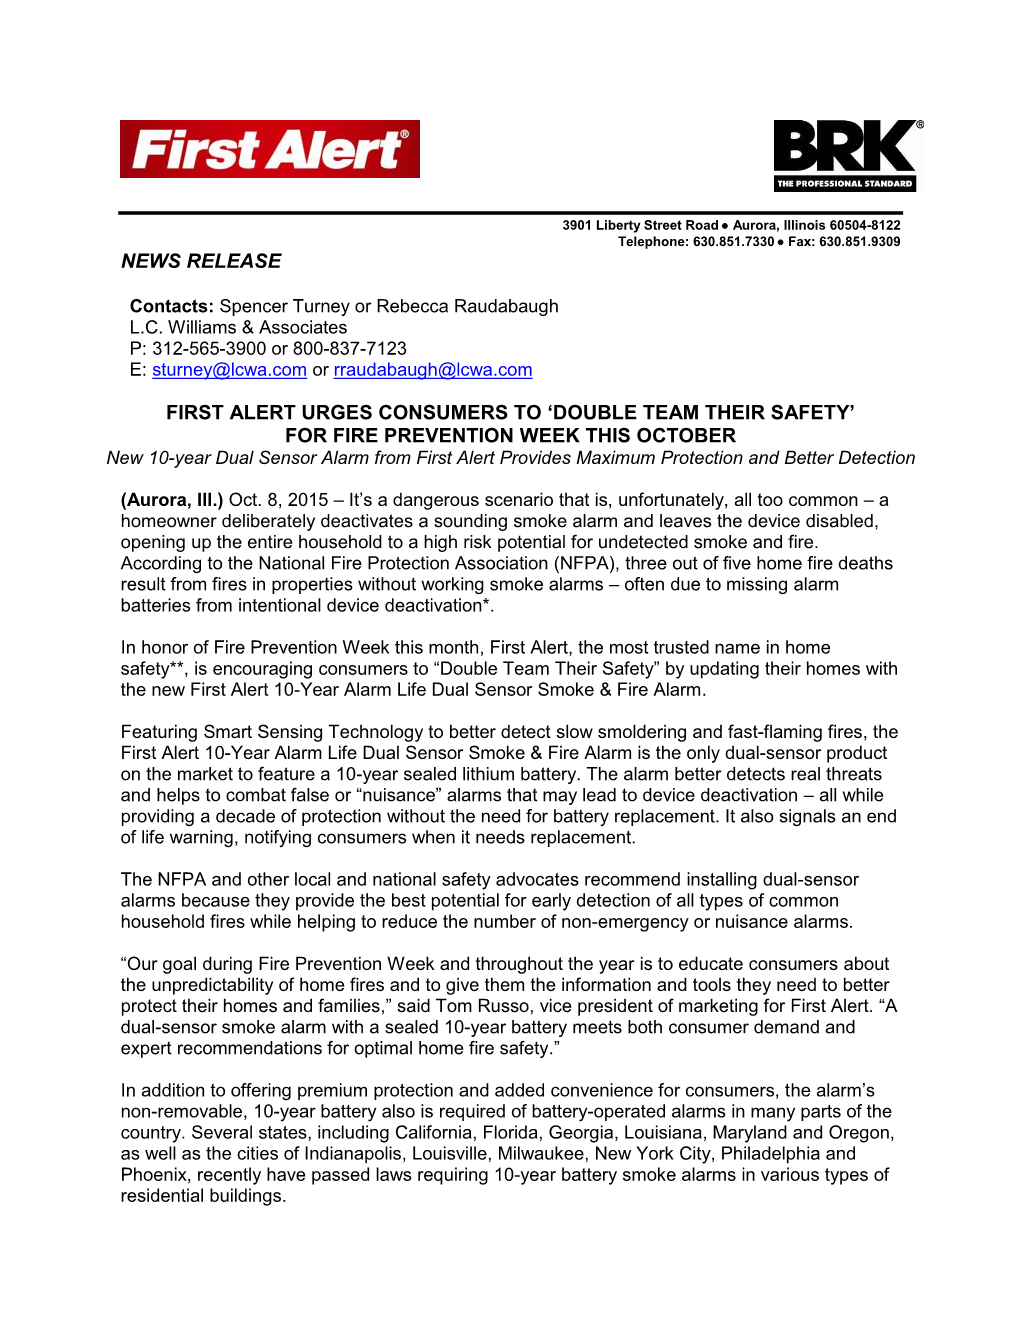 News Release First Alert Urges Consumers To